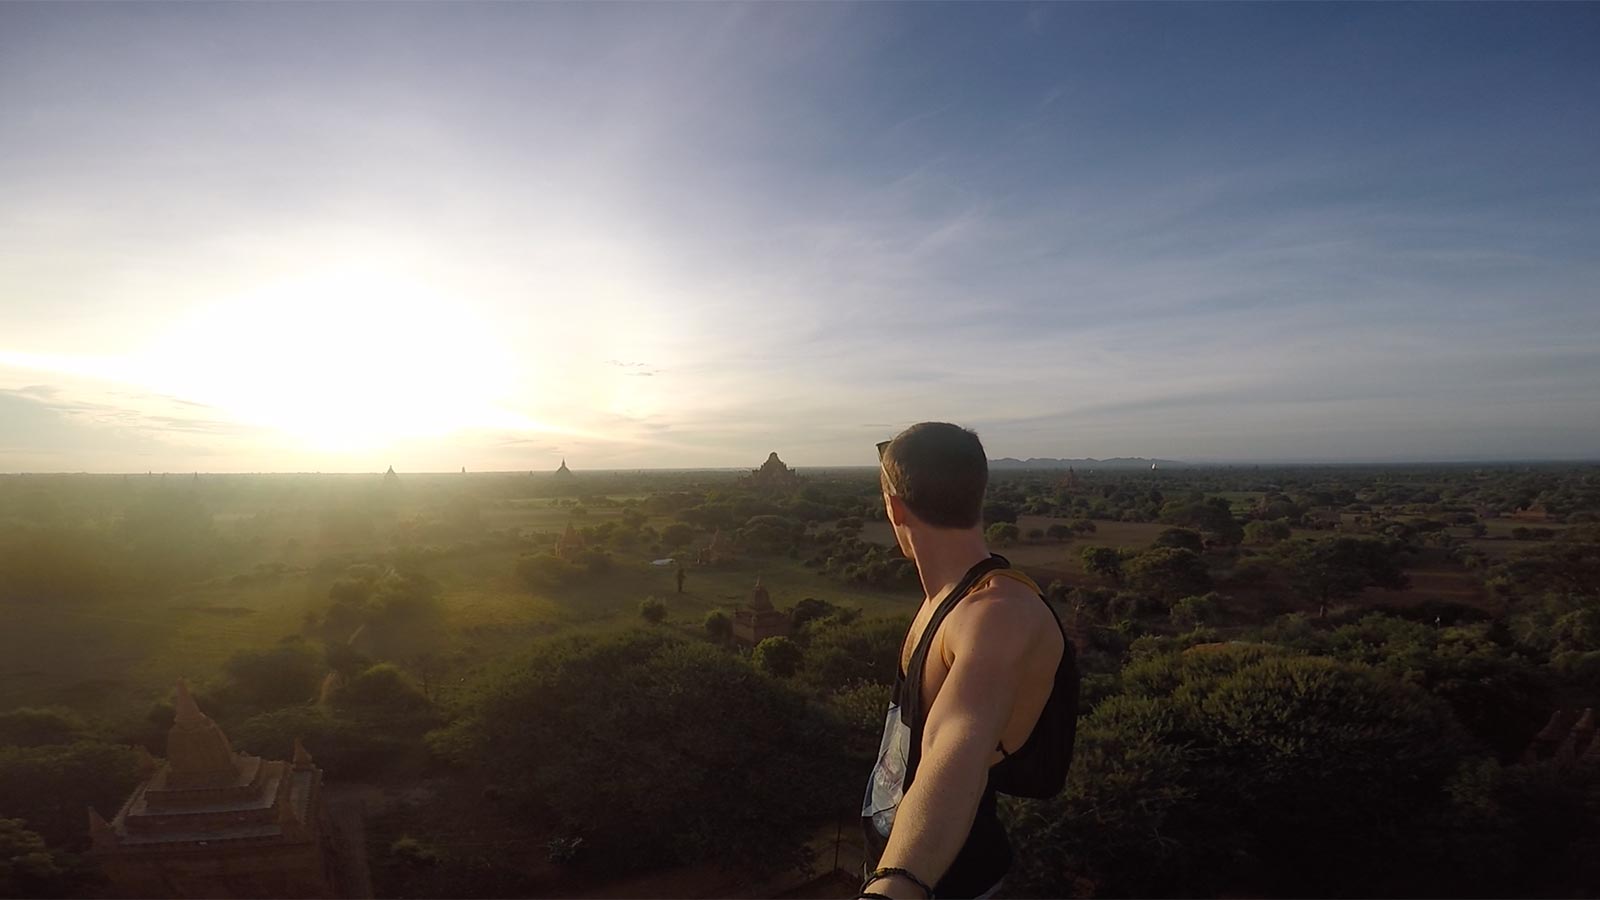 David Simpson watching sunrise by the temples in Bagan, Myanmar. Trains, temples & Bagan, The highlights of Myanmar